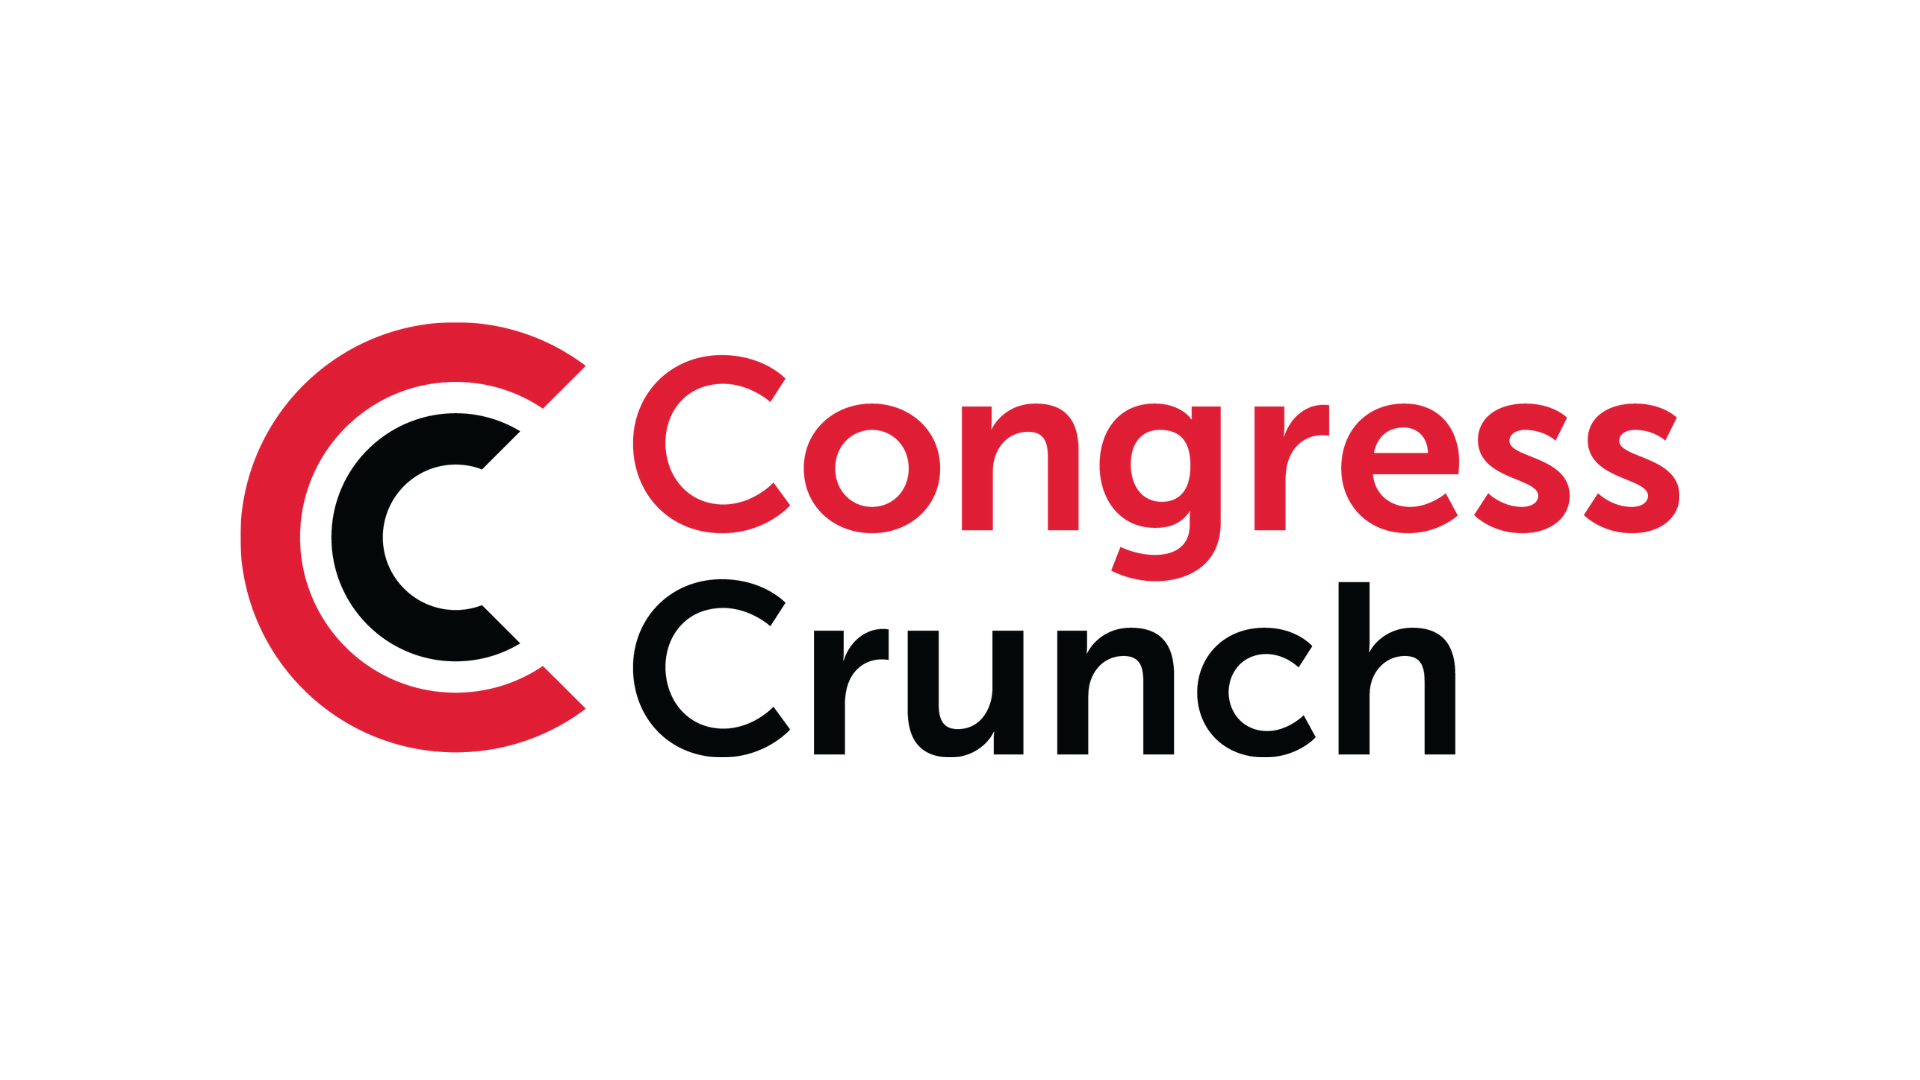 CCgroup’s Congress Crunch: How to prepare for the MWC interview hot seat